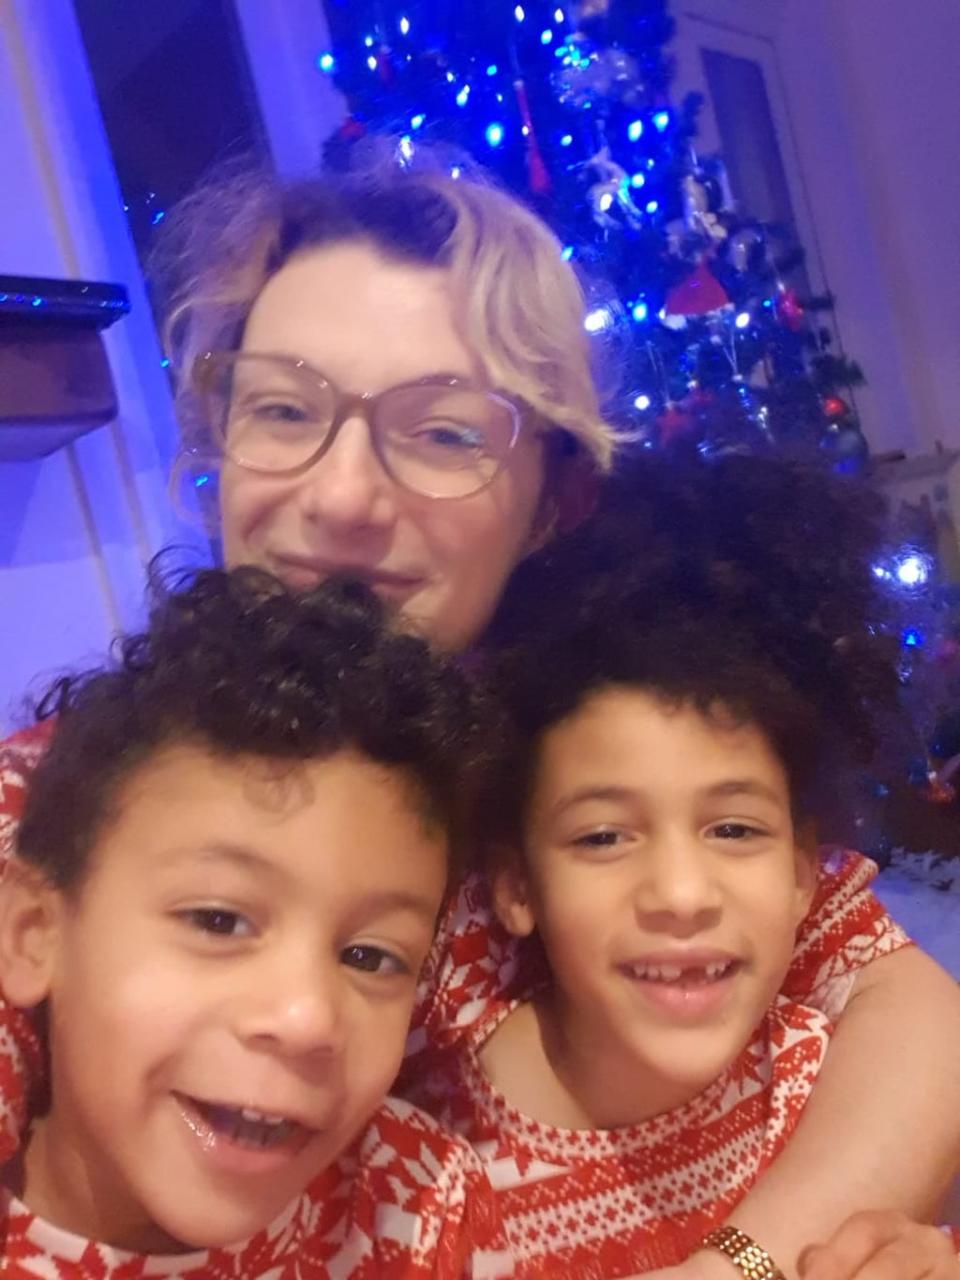 Cristina and her children had to spend Christmas without her husband Christian (Cristina Feretti)